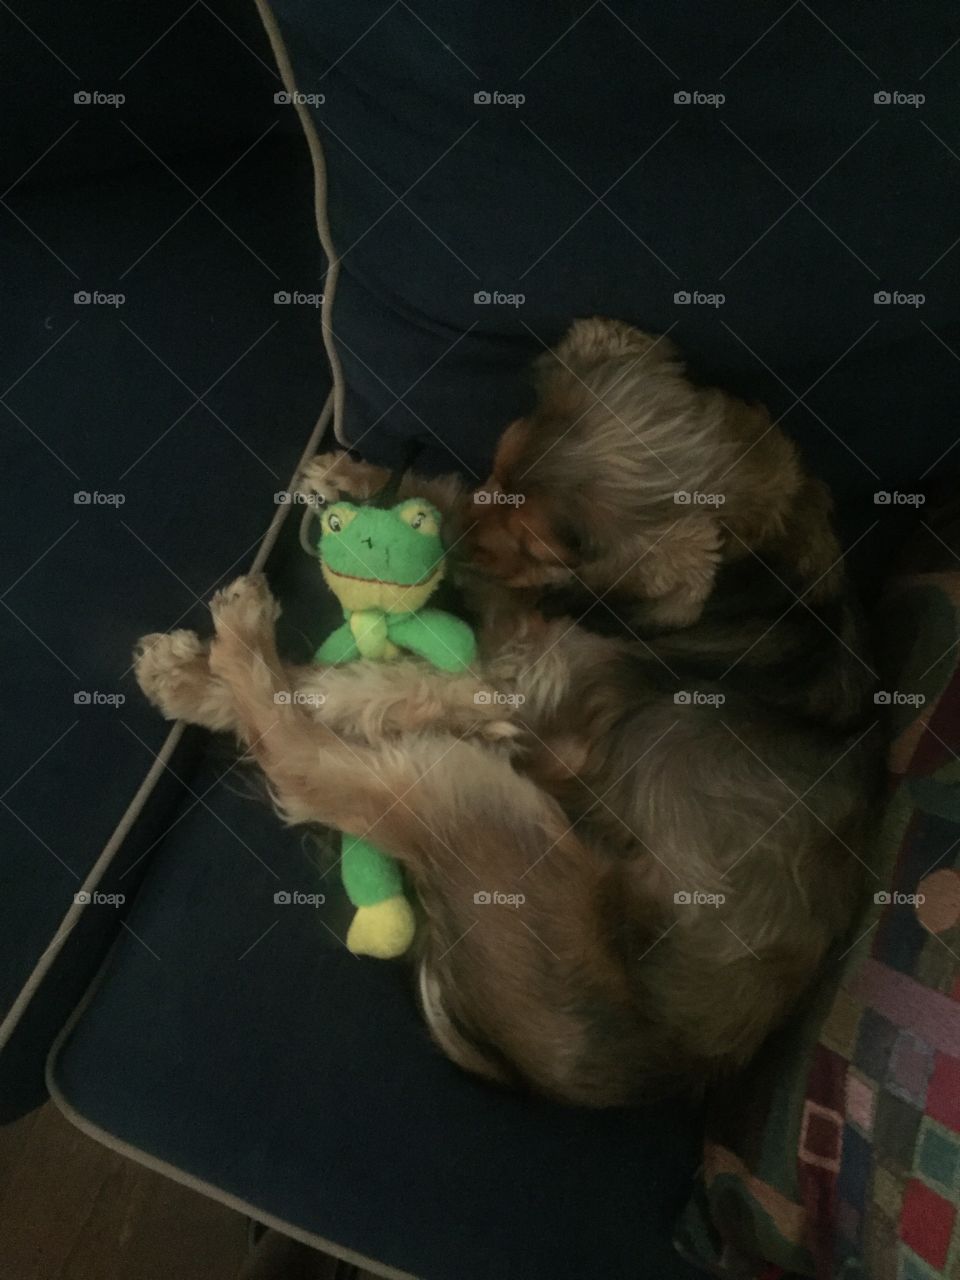 Puppy curled up with toy